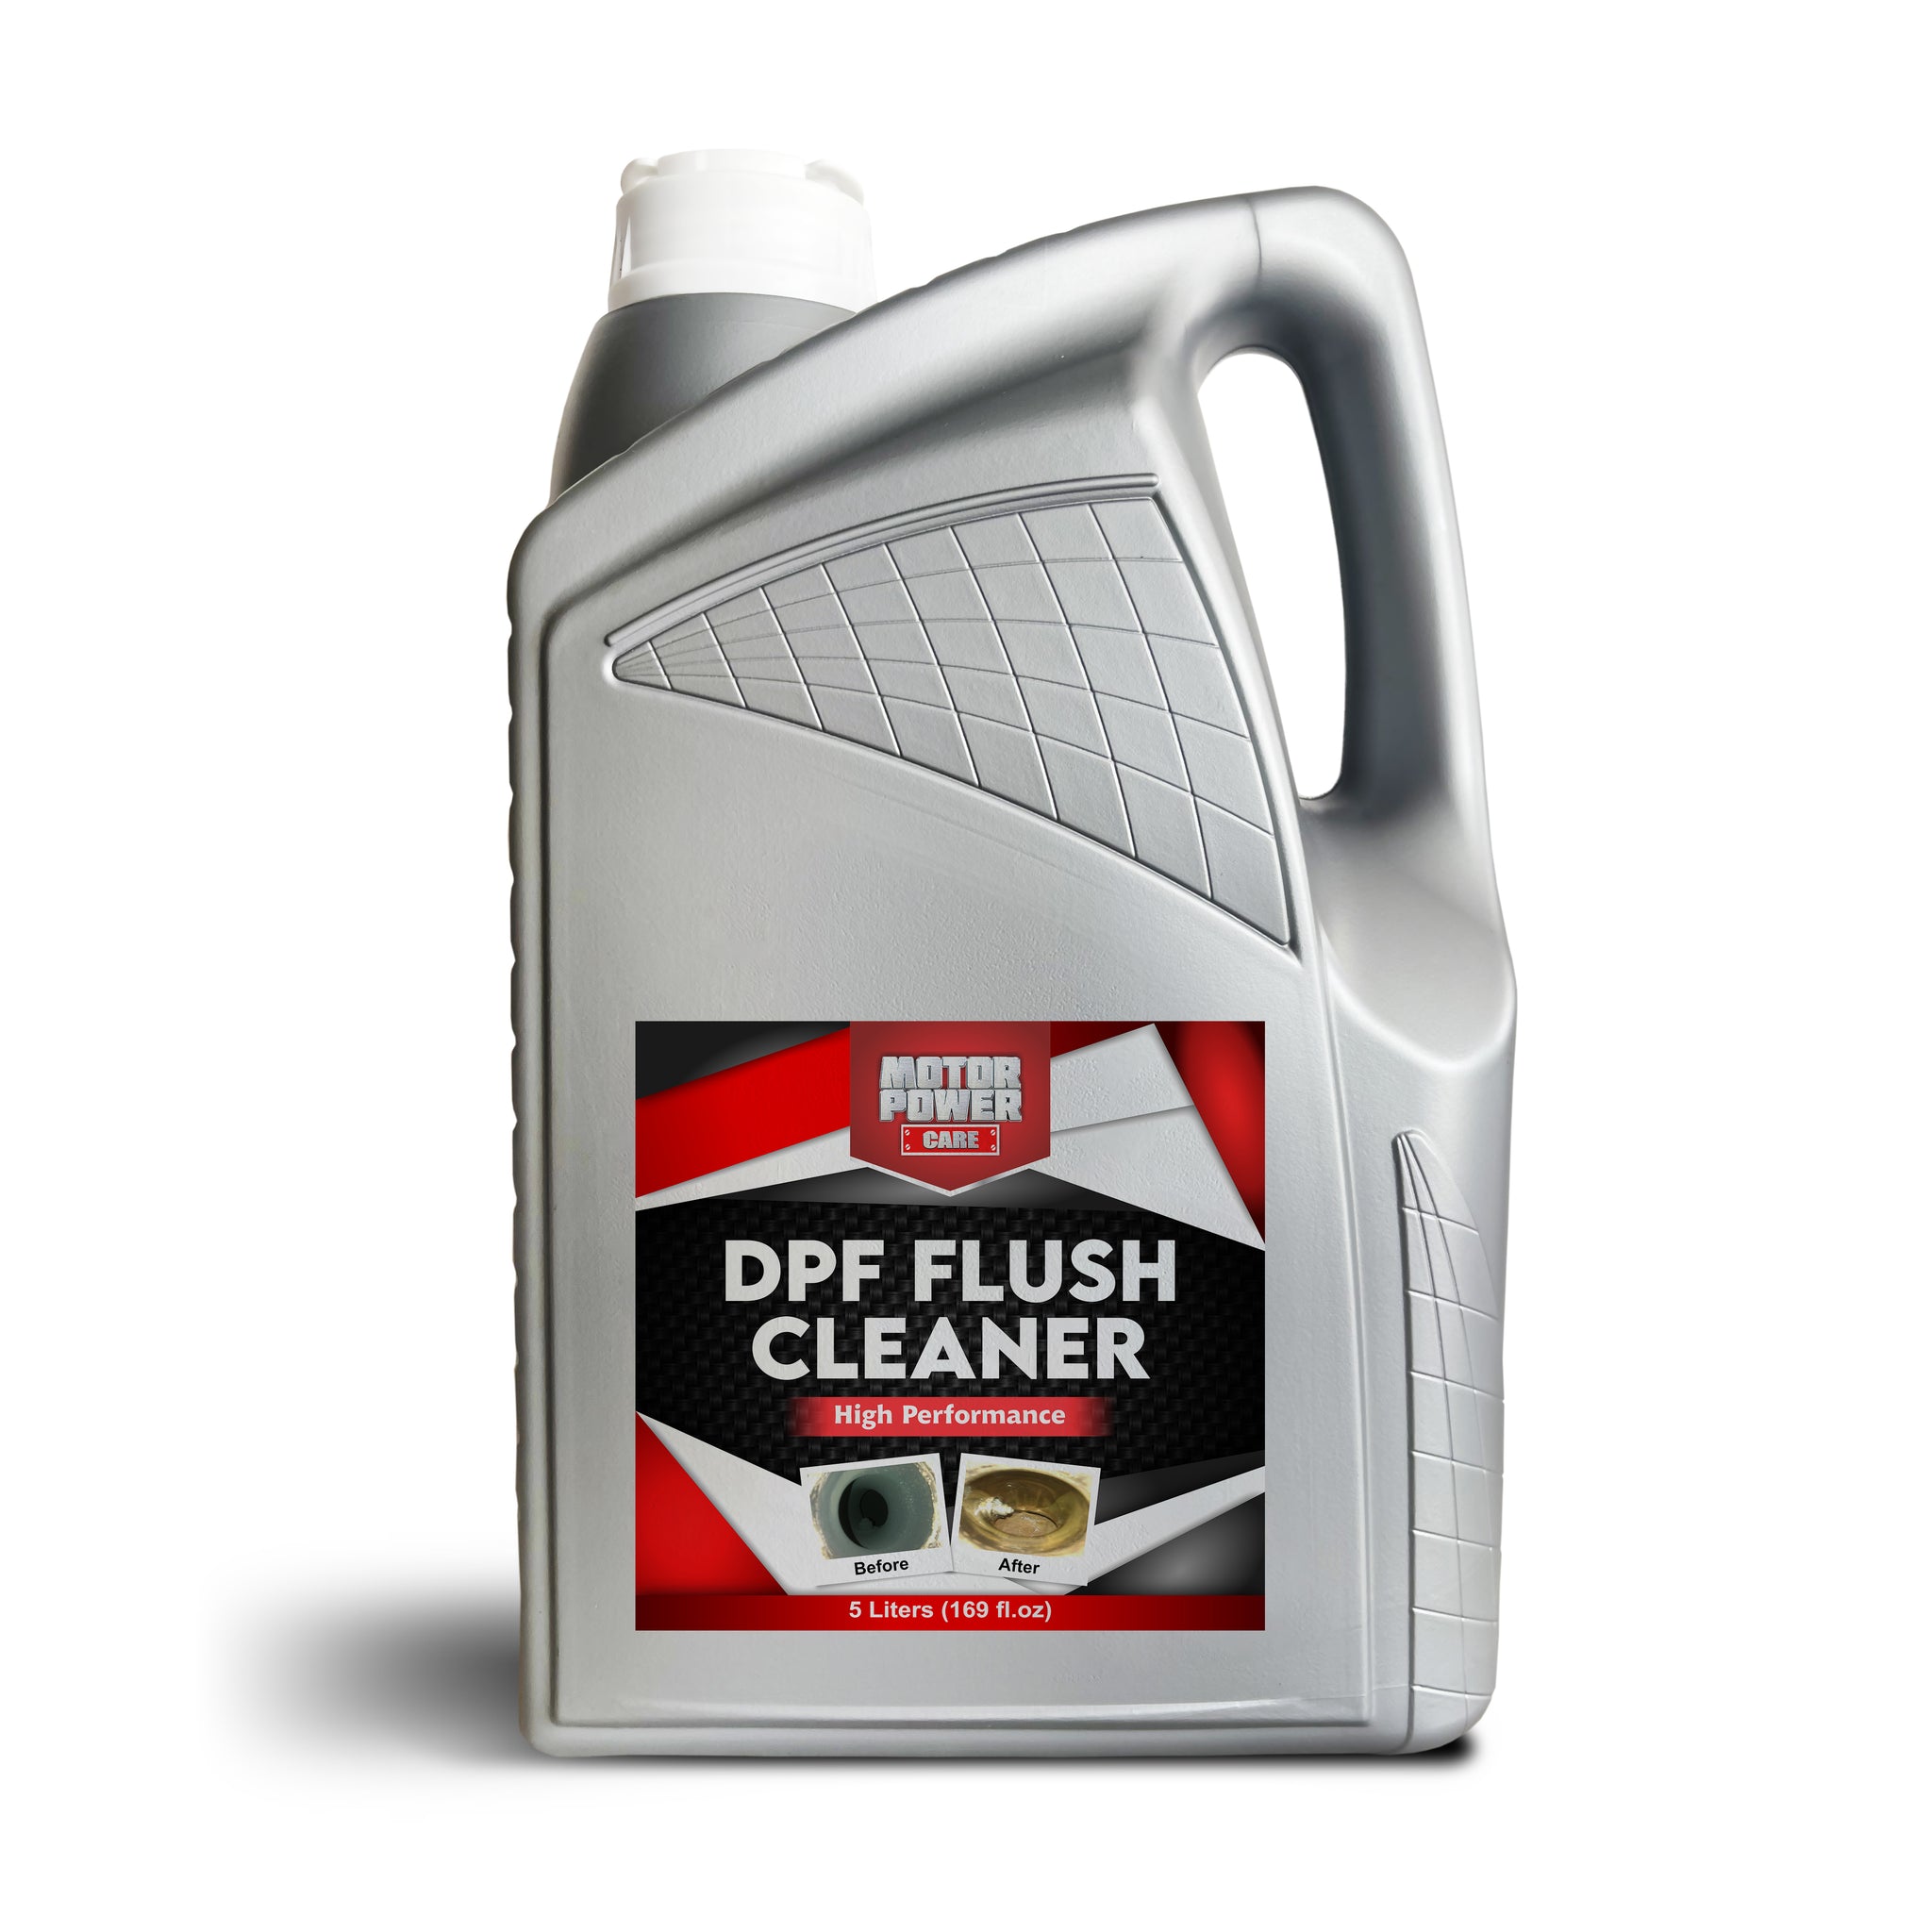 Diesel Particulate Filter Cleaning (in 2 hours)